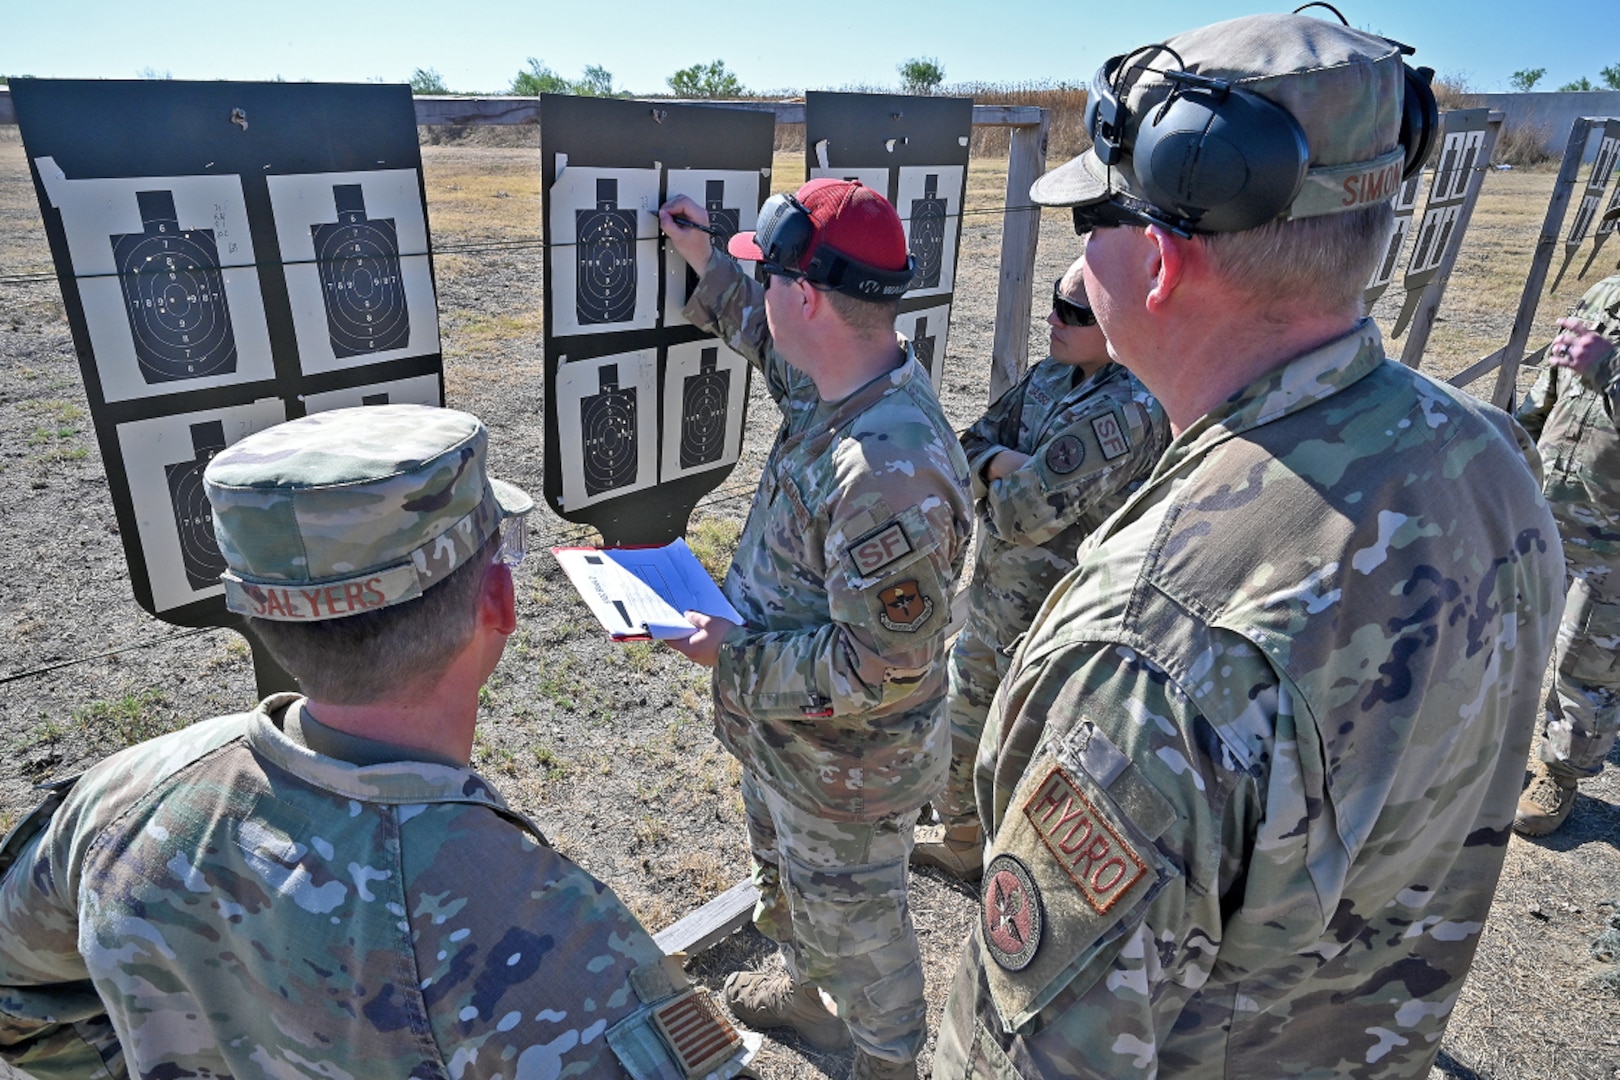 JBSA-Chapman Training Annex hosts Excellence in Competition Rifle Shoot